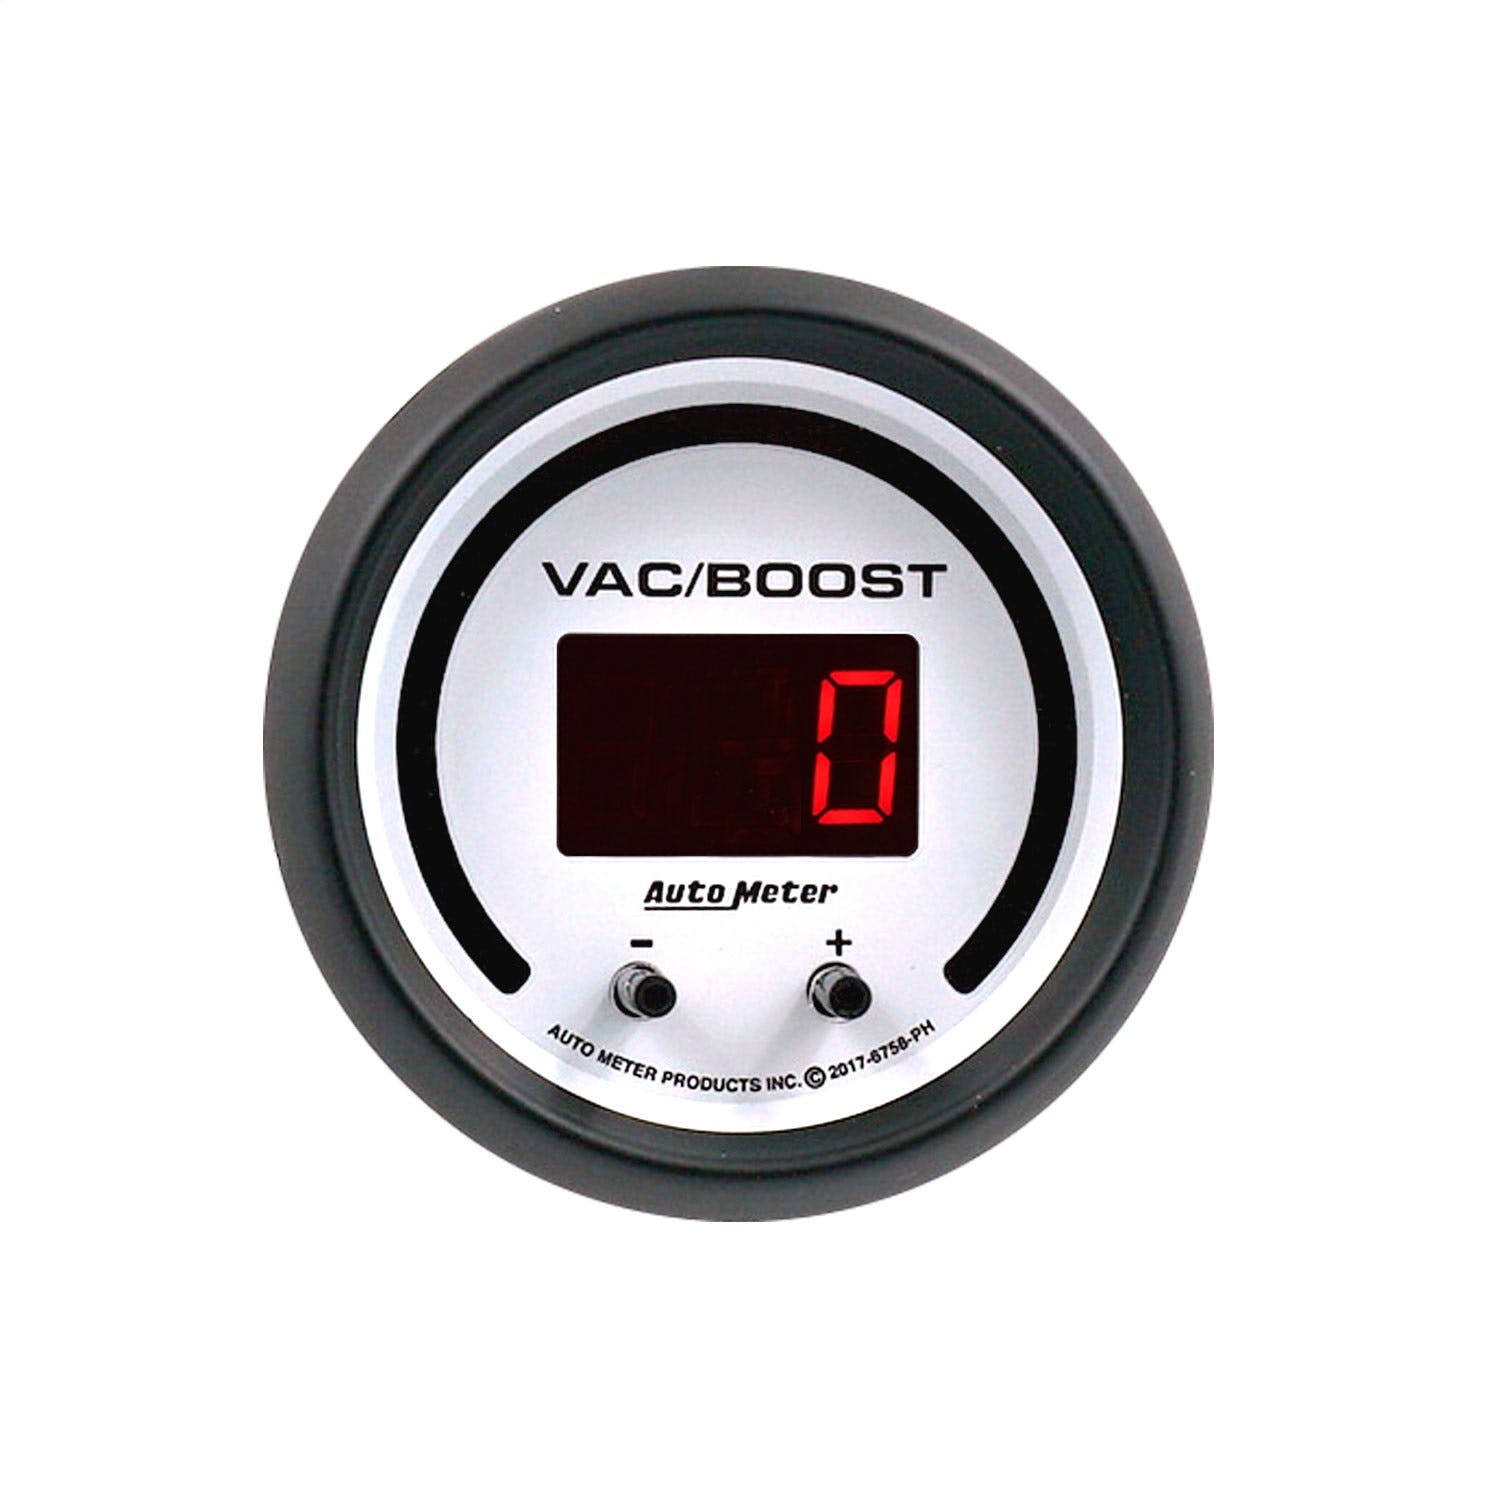 AutoMeter Products 6758-PH Gauge, Vac/Boost, 2 1/16, Two Channel, Selectable, Phantom Elite Digital